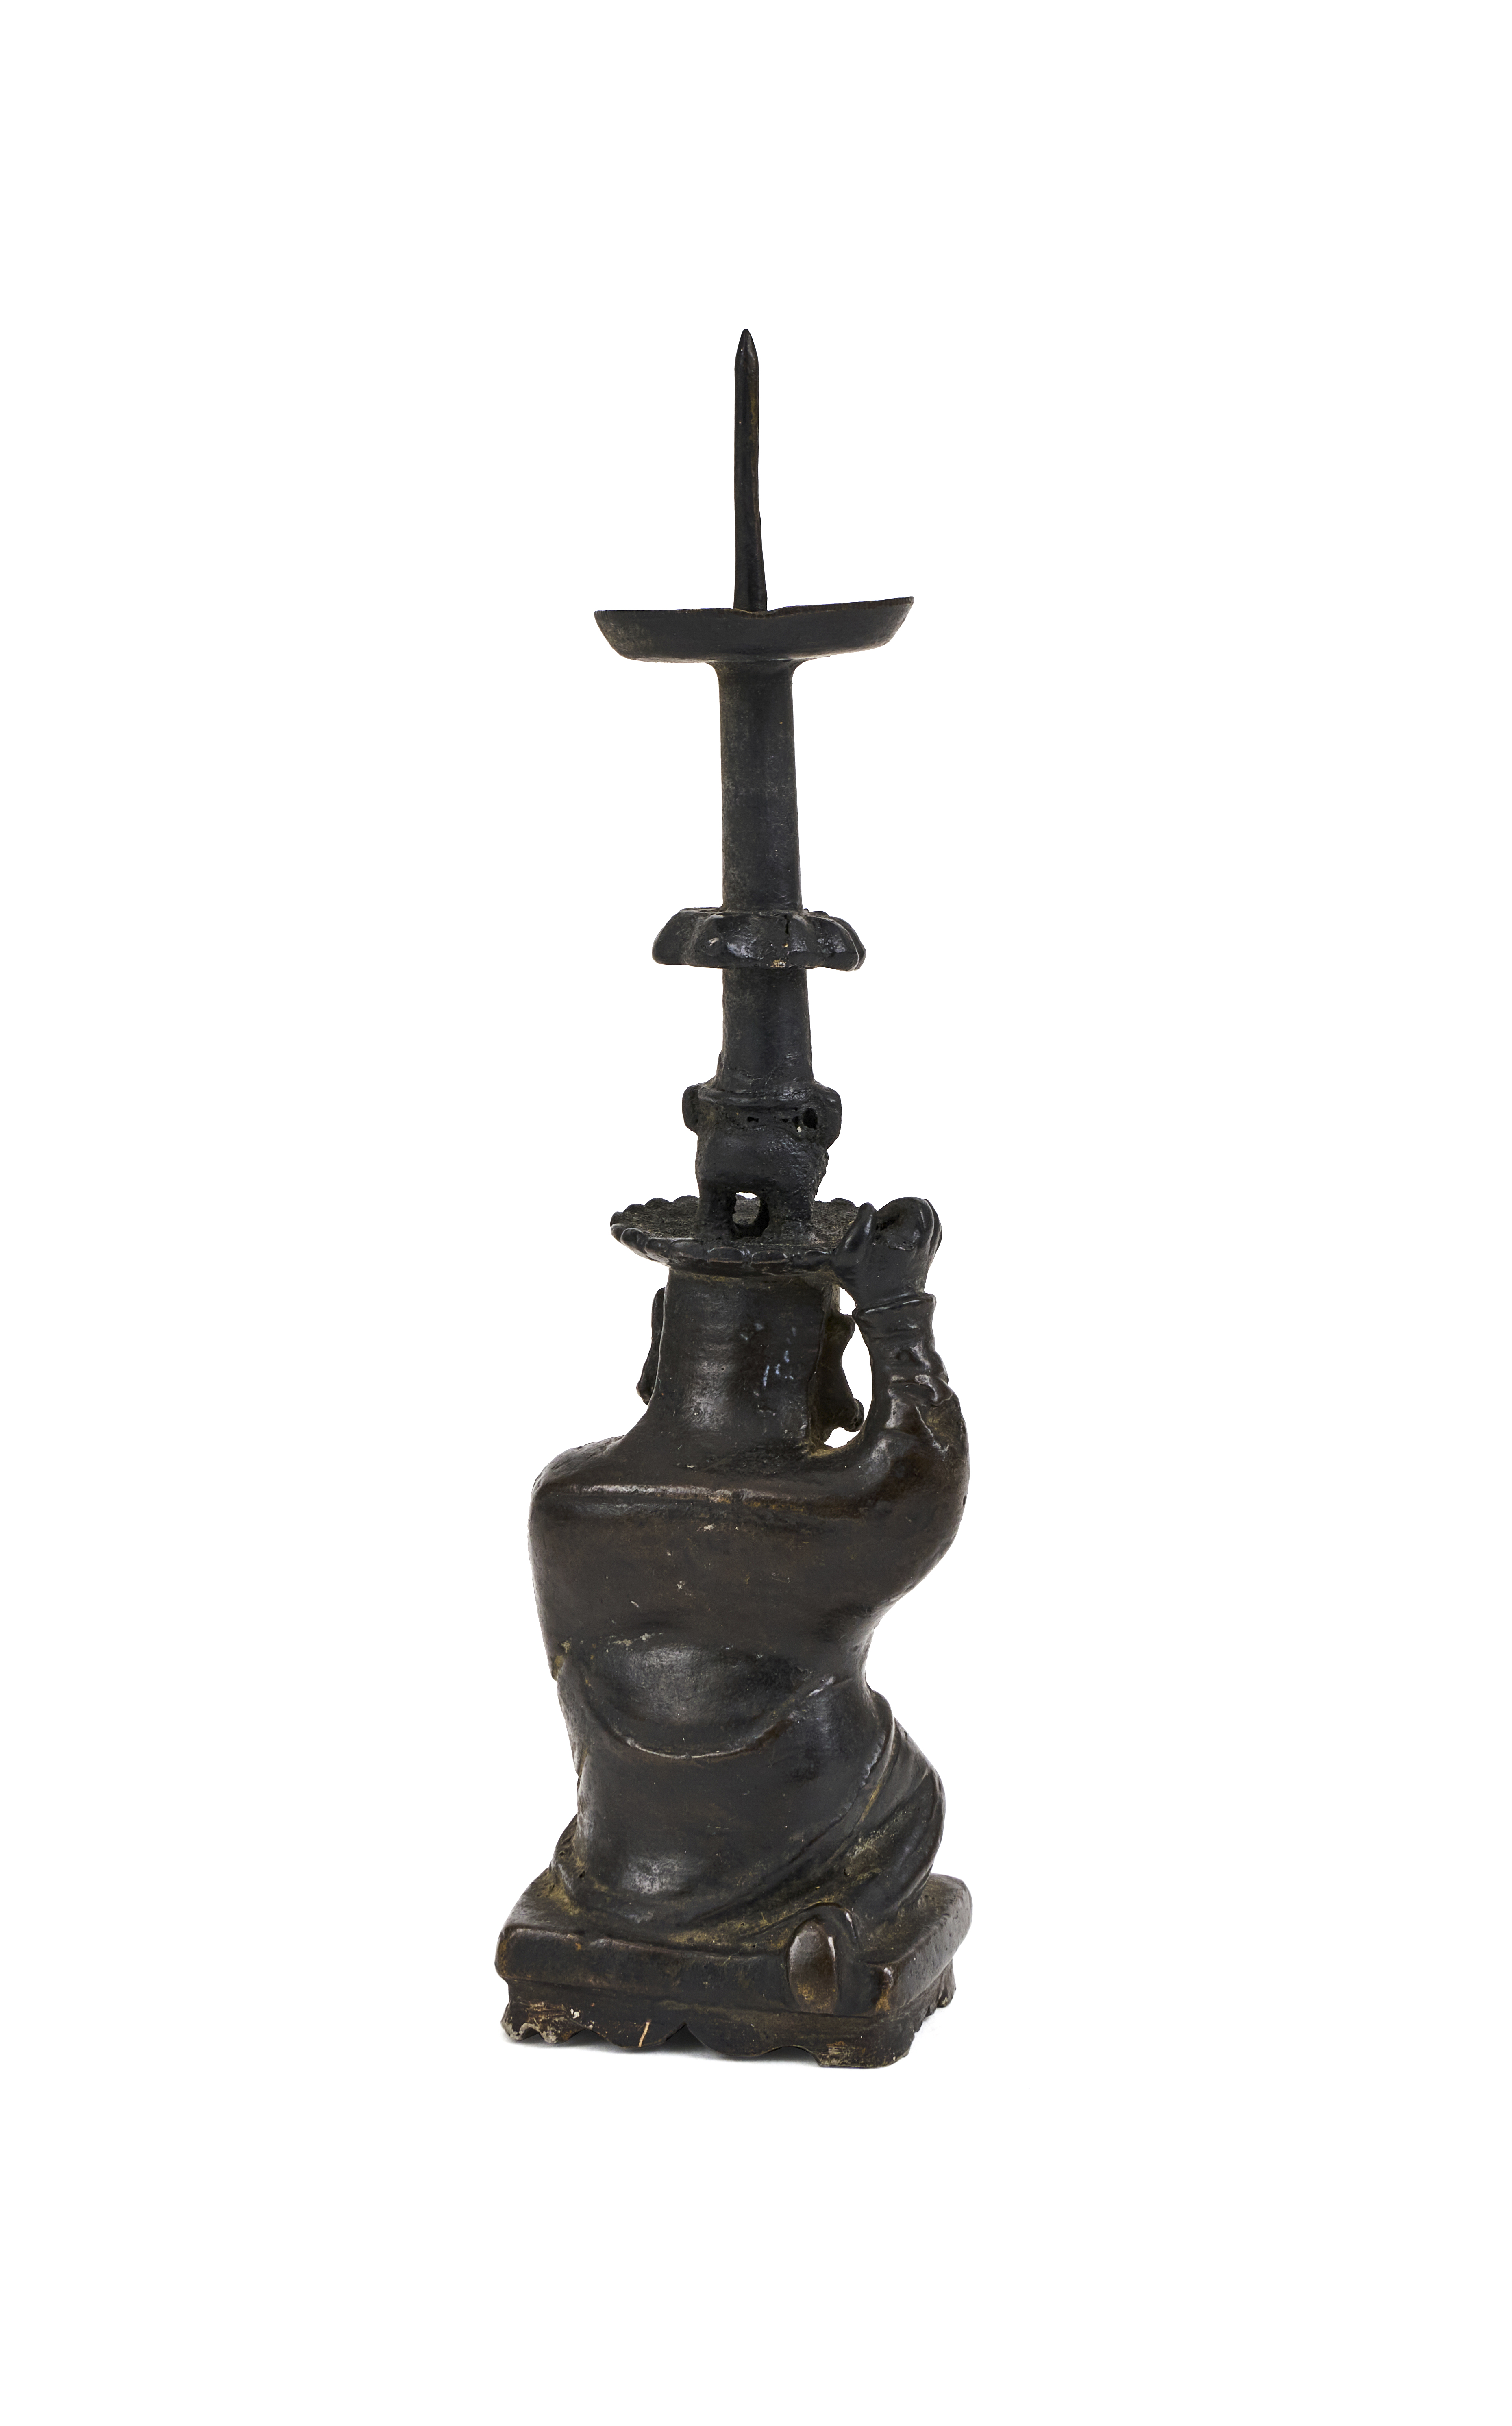 A CHINESE BRONZE CANDLESTICK, QING DYNASTY (1644-1911) - Image 3 of 4